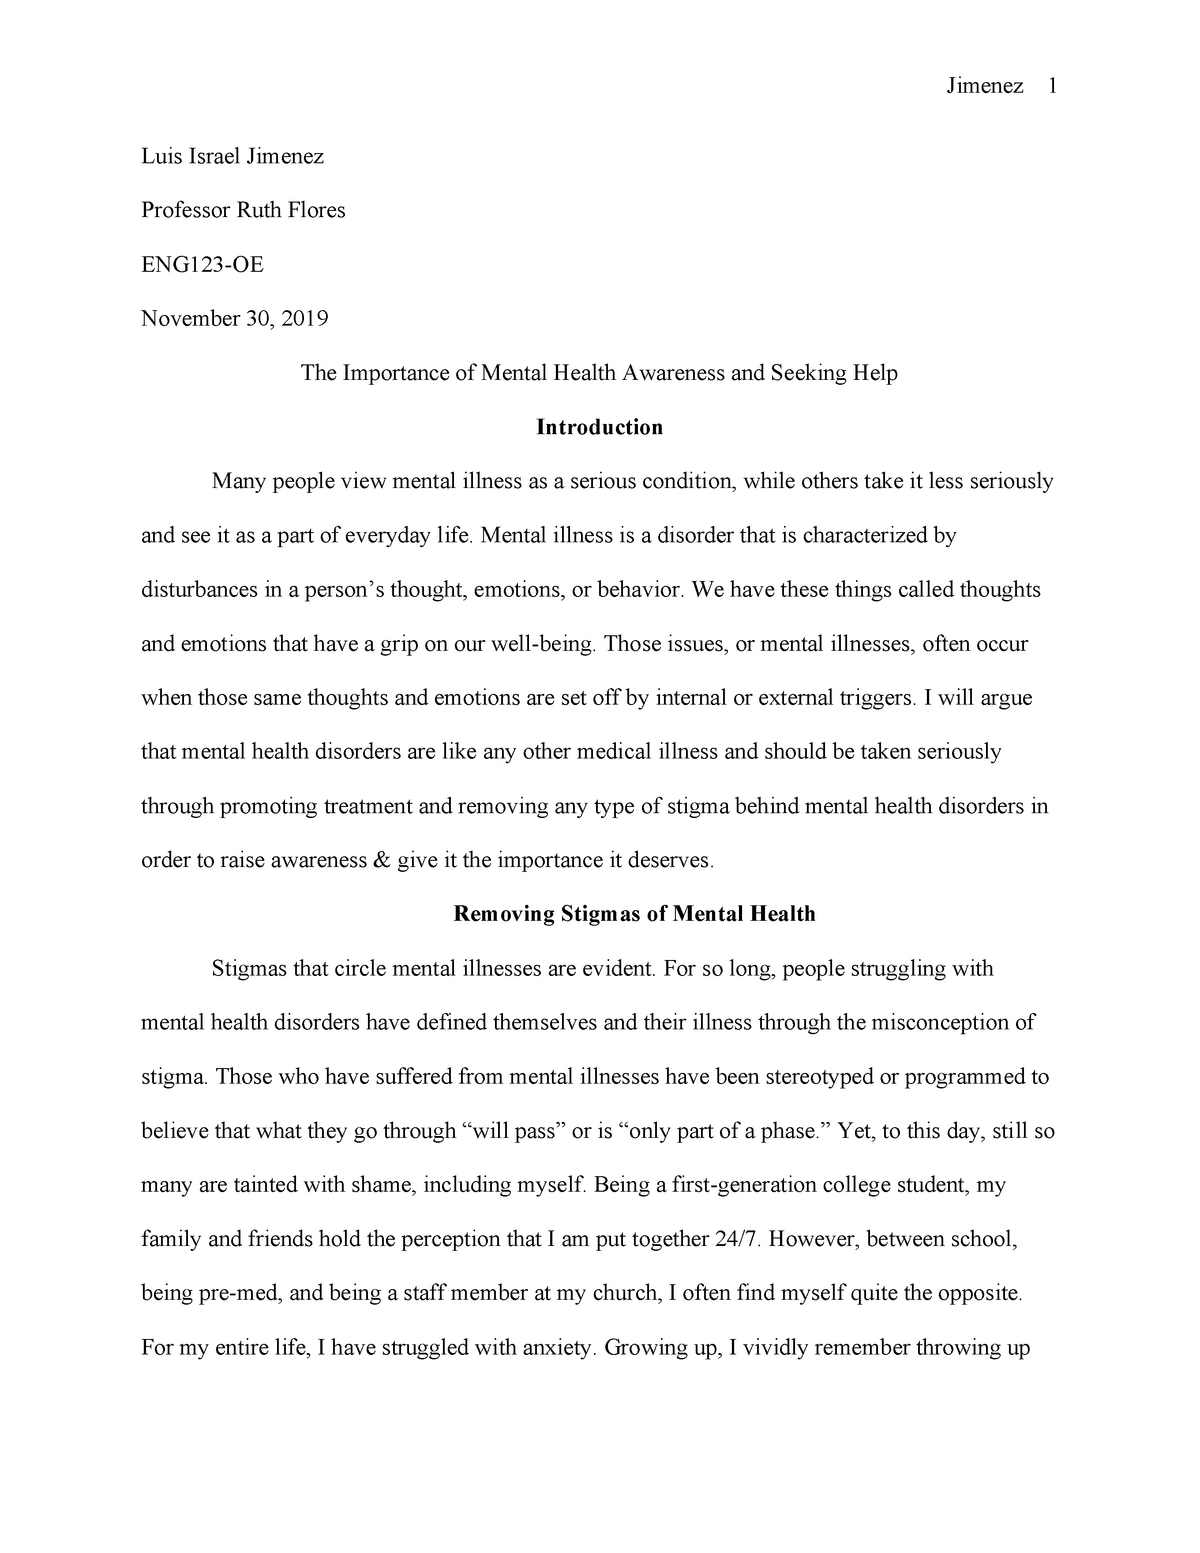 concept of man research paper